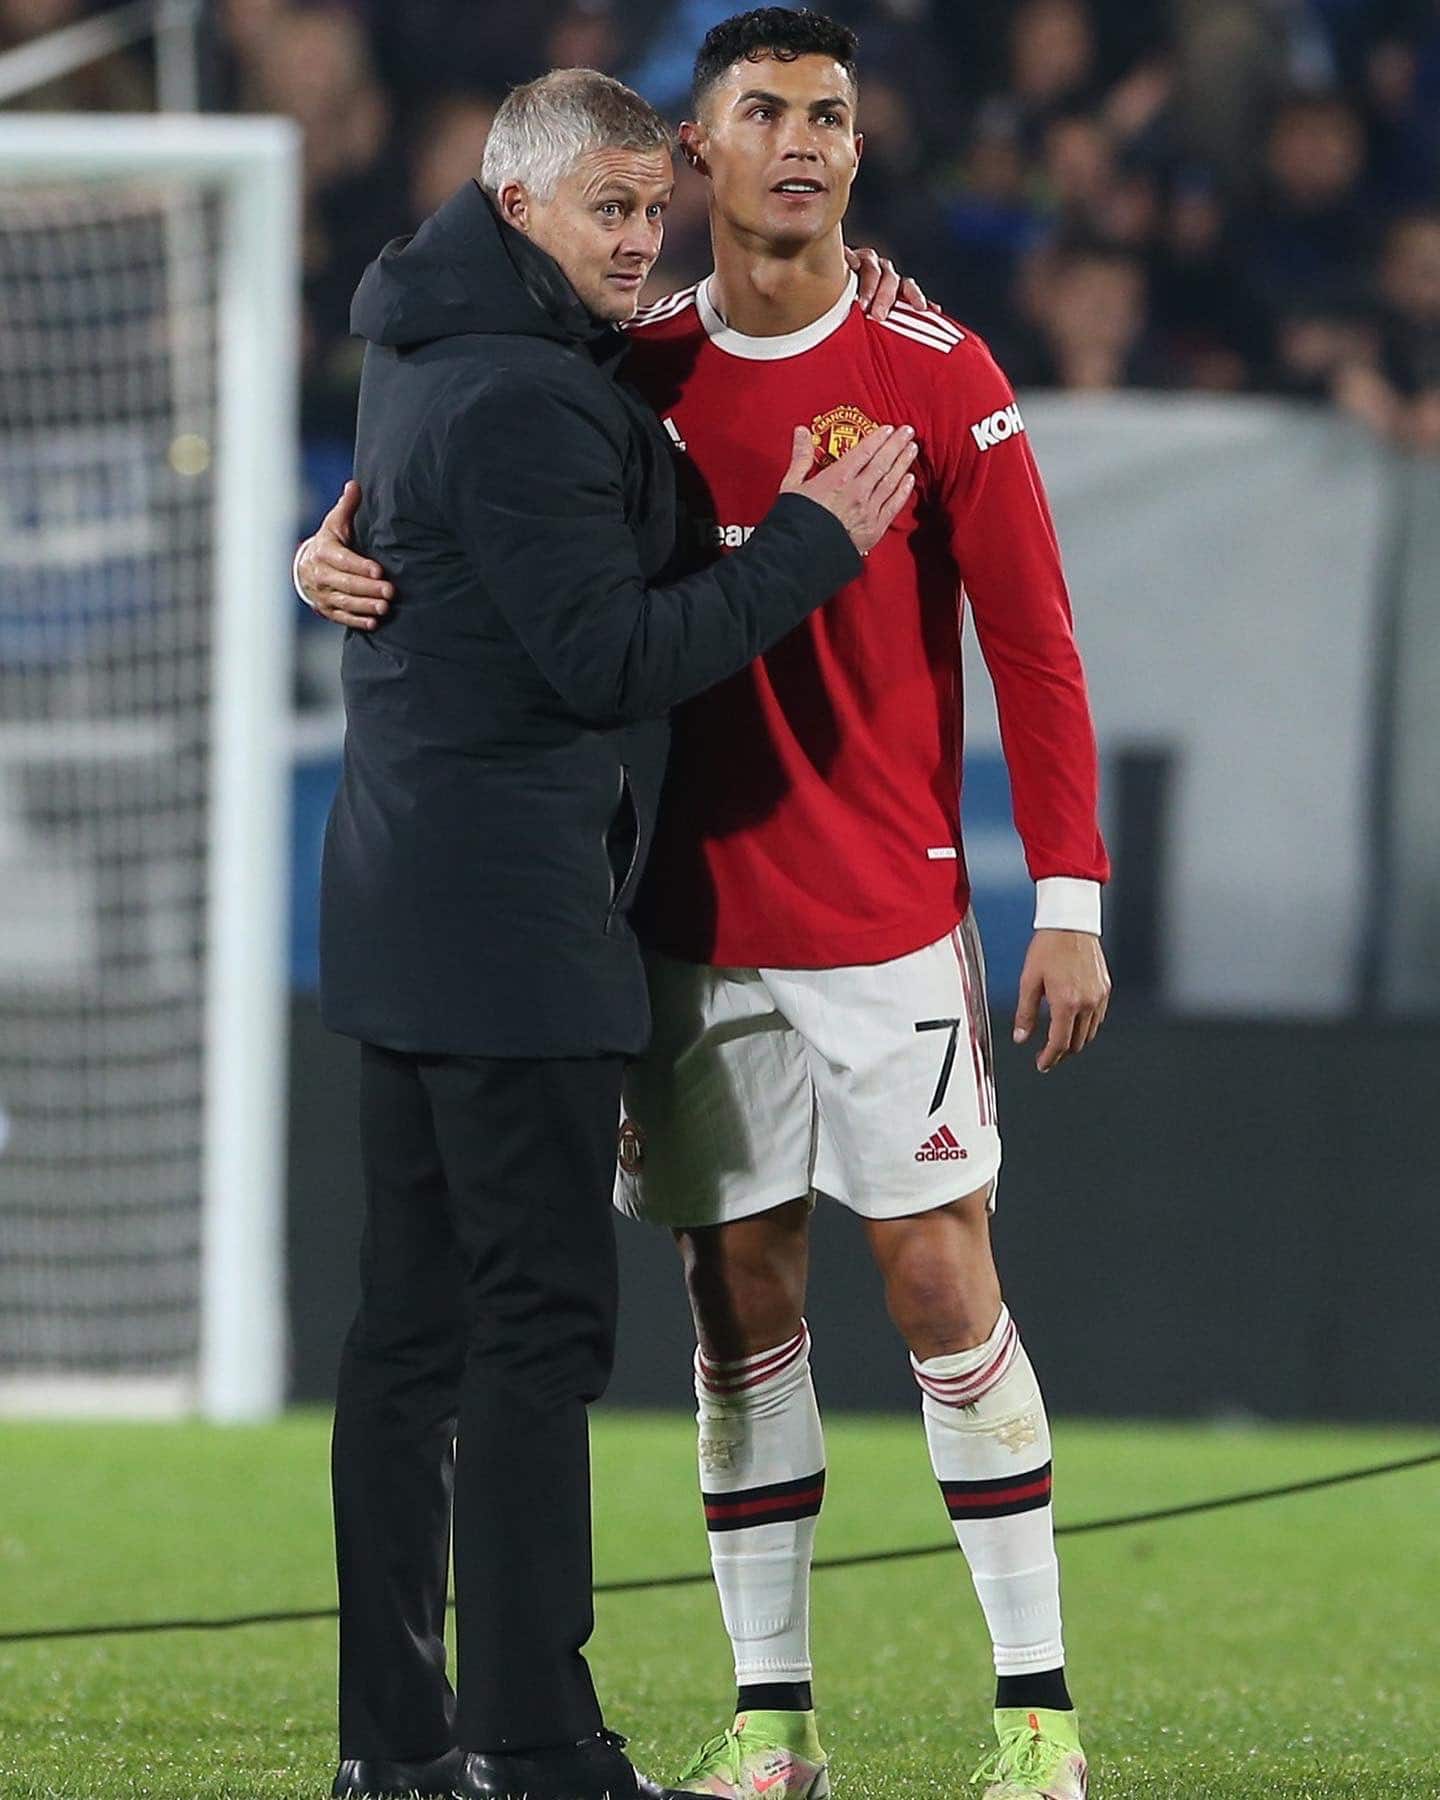 "Ole Is An Outstanding Human Being" - Ronaldo Reacts To Solskjaer Sack As Man United Coach